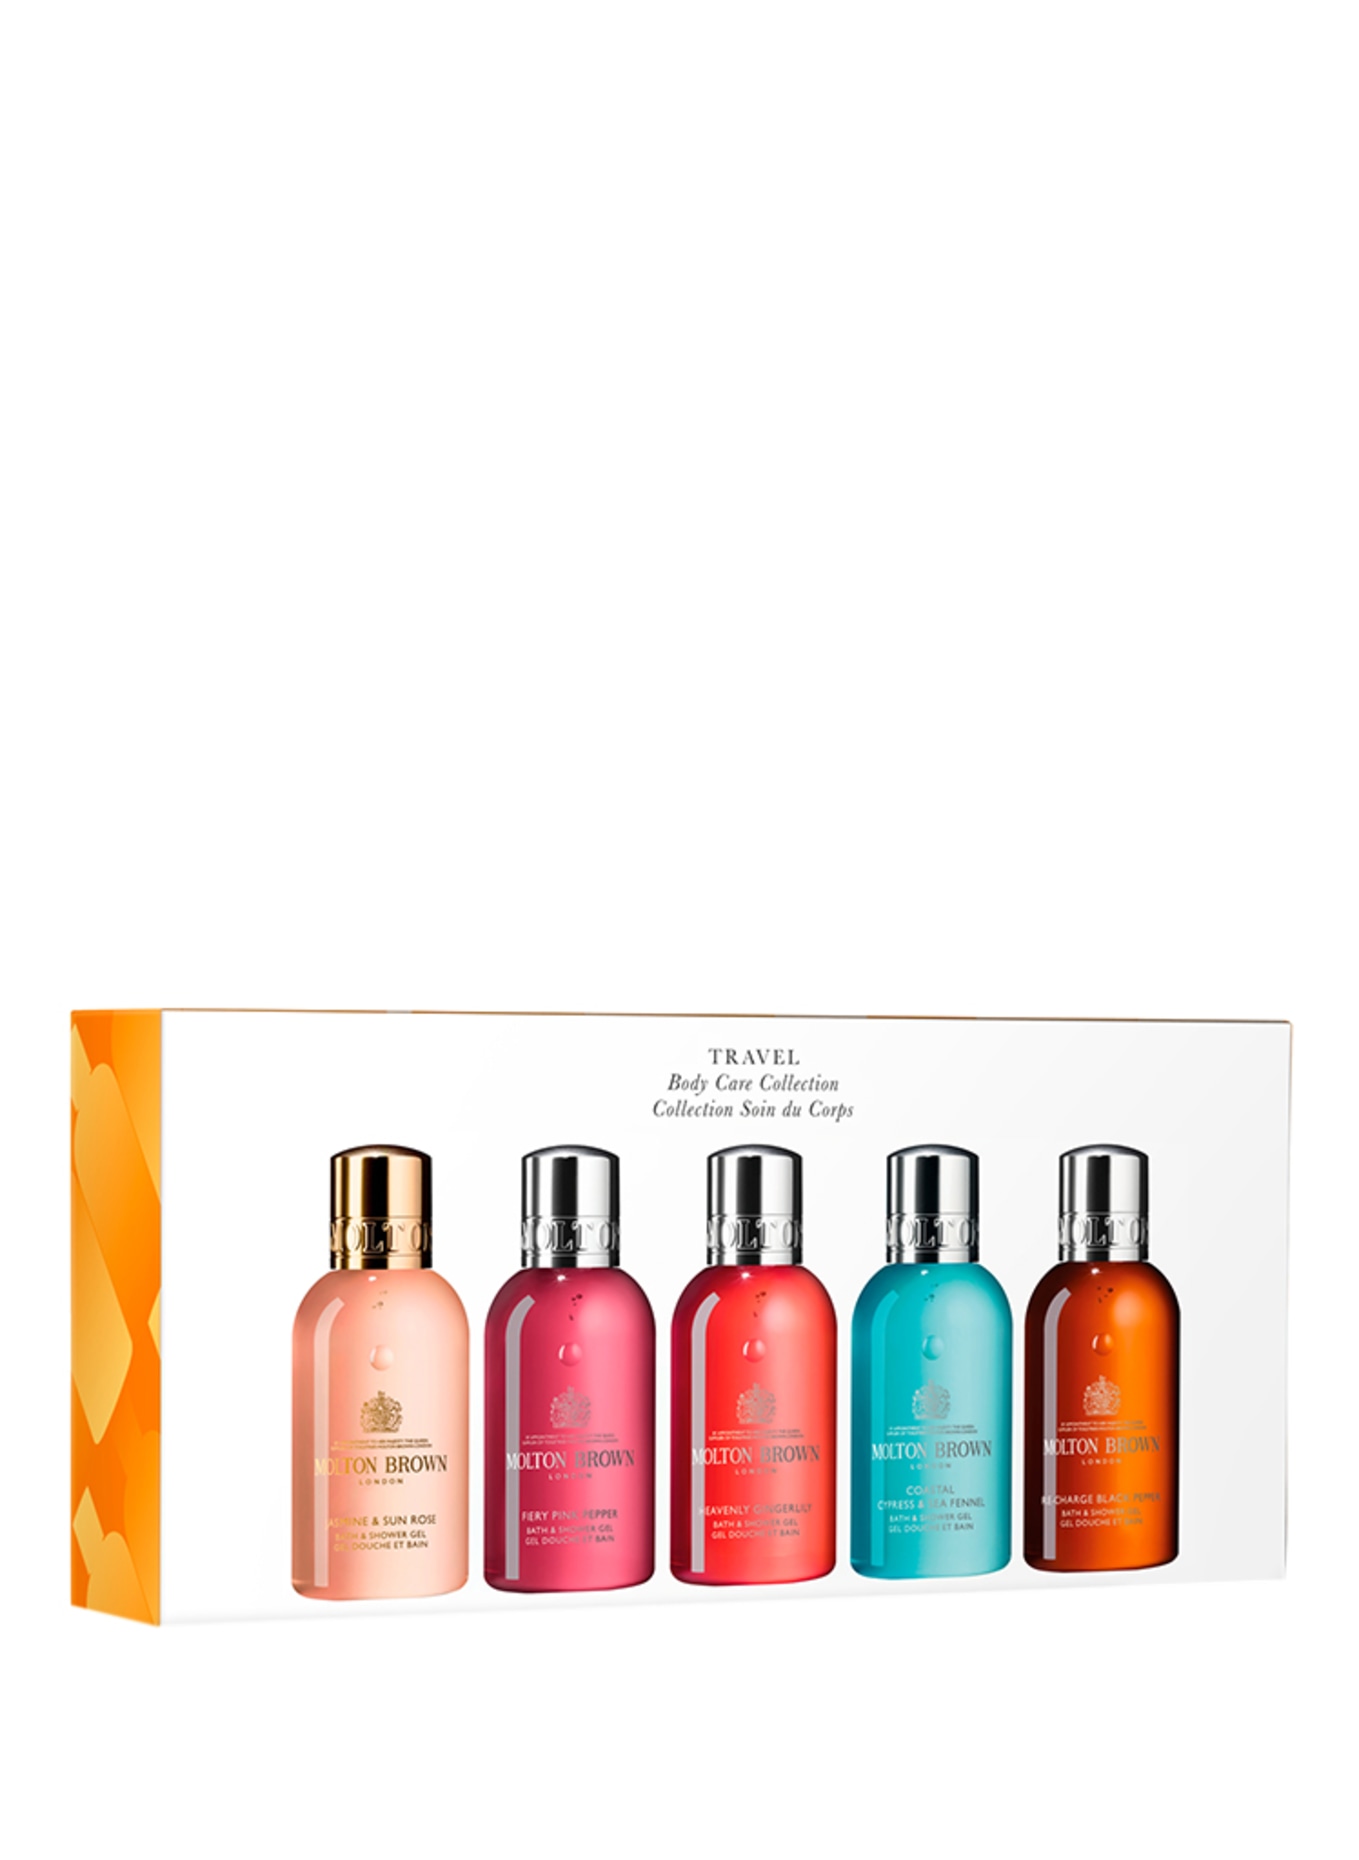 MOLTON BROWN TRAVEL BODY CARE COLLECTION (Obrázek 1)